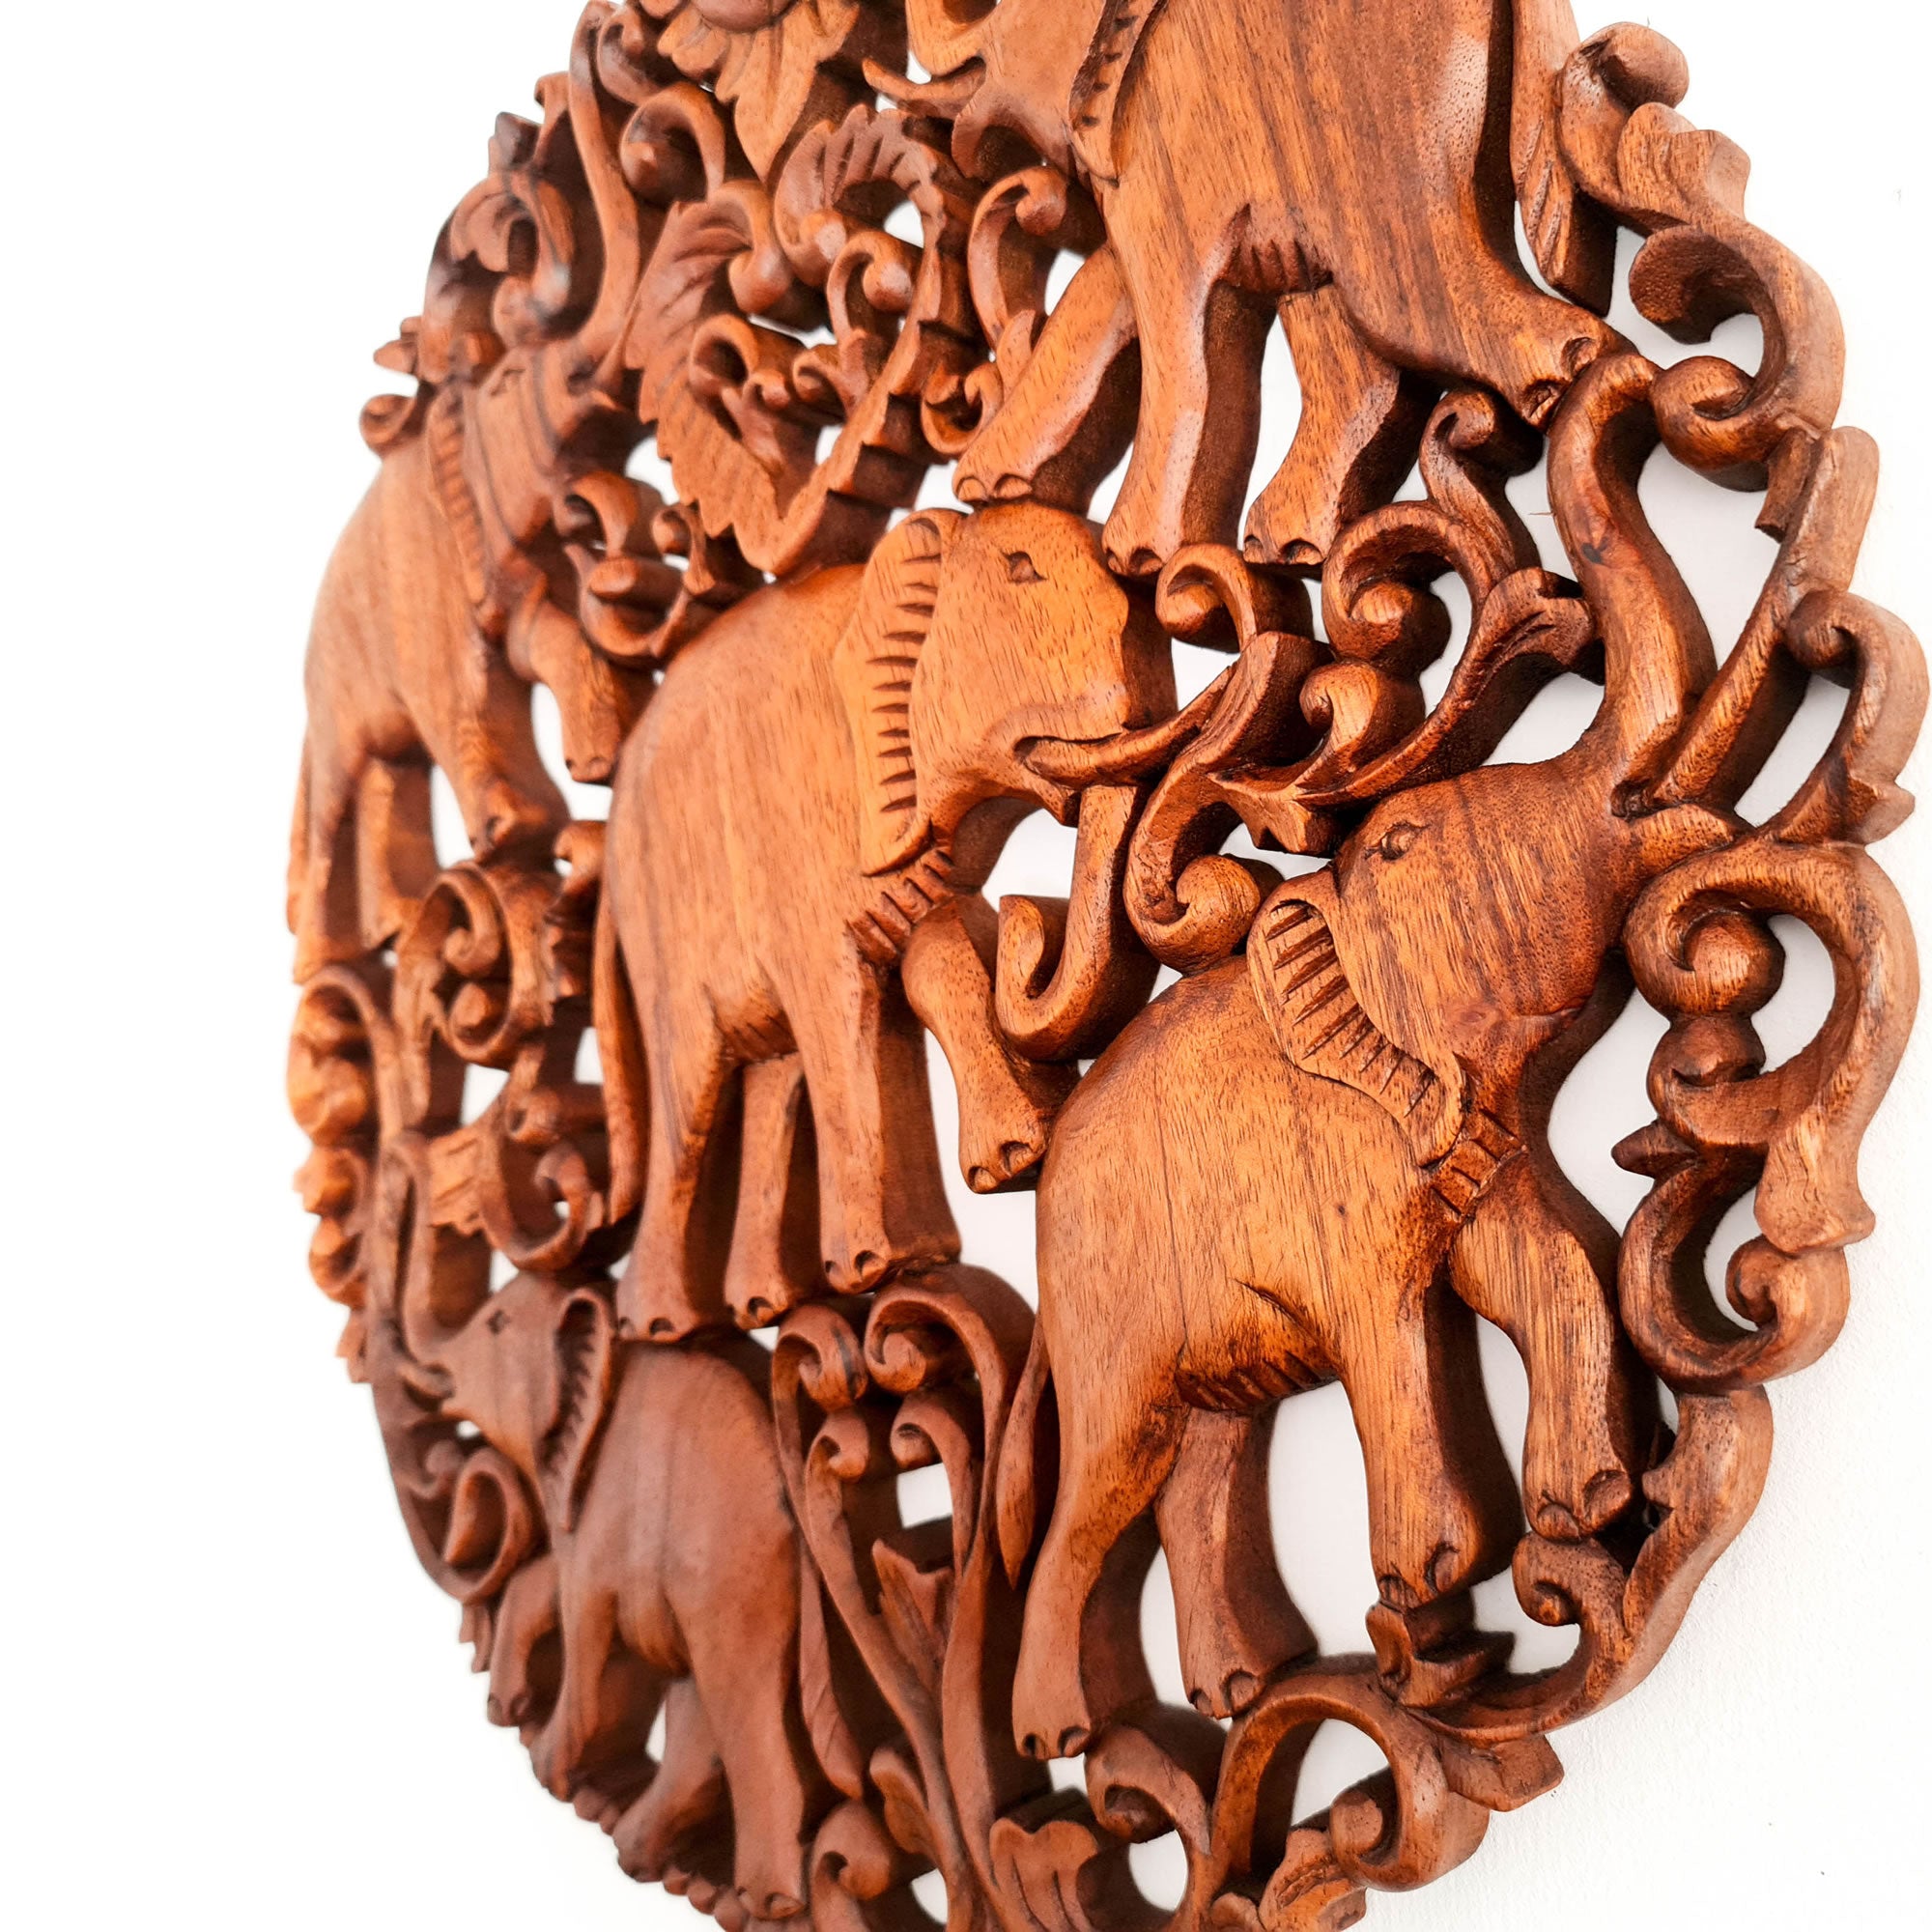 Jungle Elephants Carved Wooden Hand Carved Decorative Panel Sculpture Nature - Easternada A perfect Gift idea